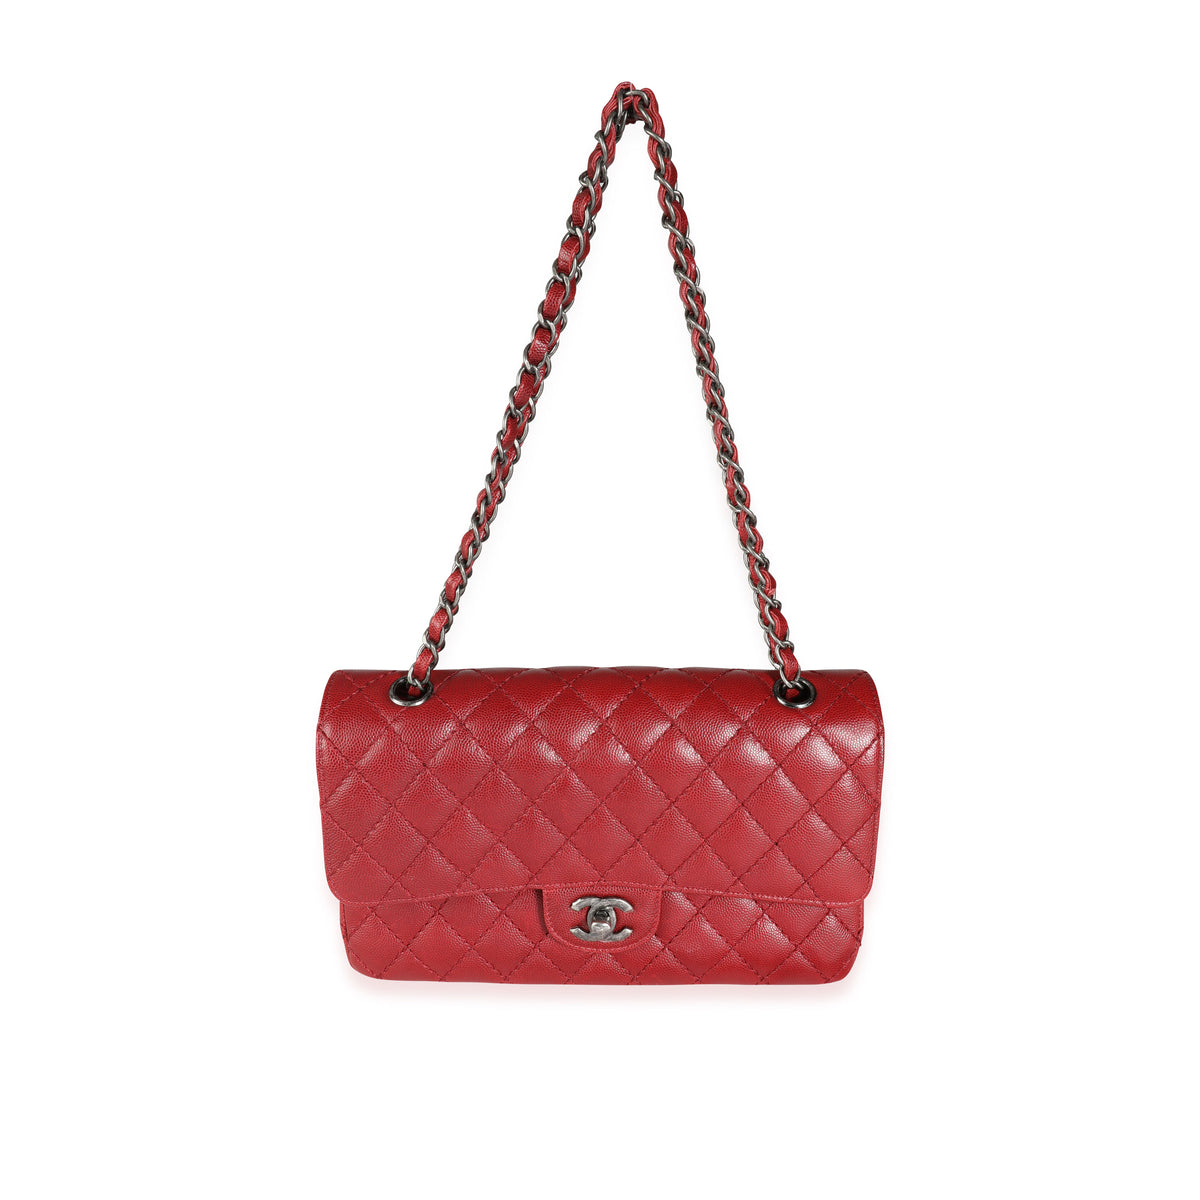 Chanel Dark Red Quilted Caviar Medium Classic Double Flap Bag